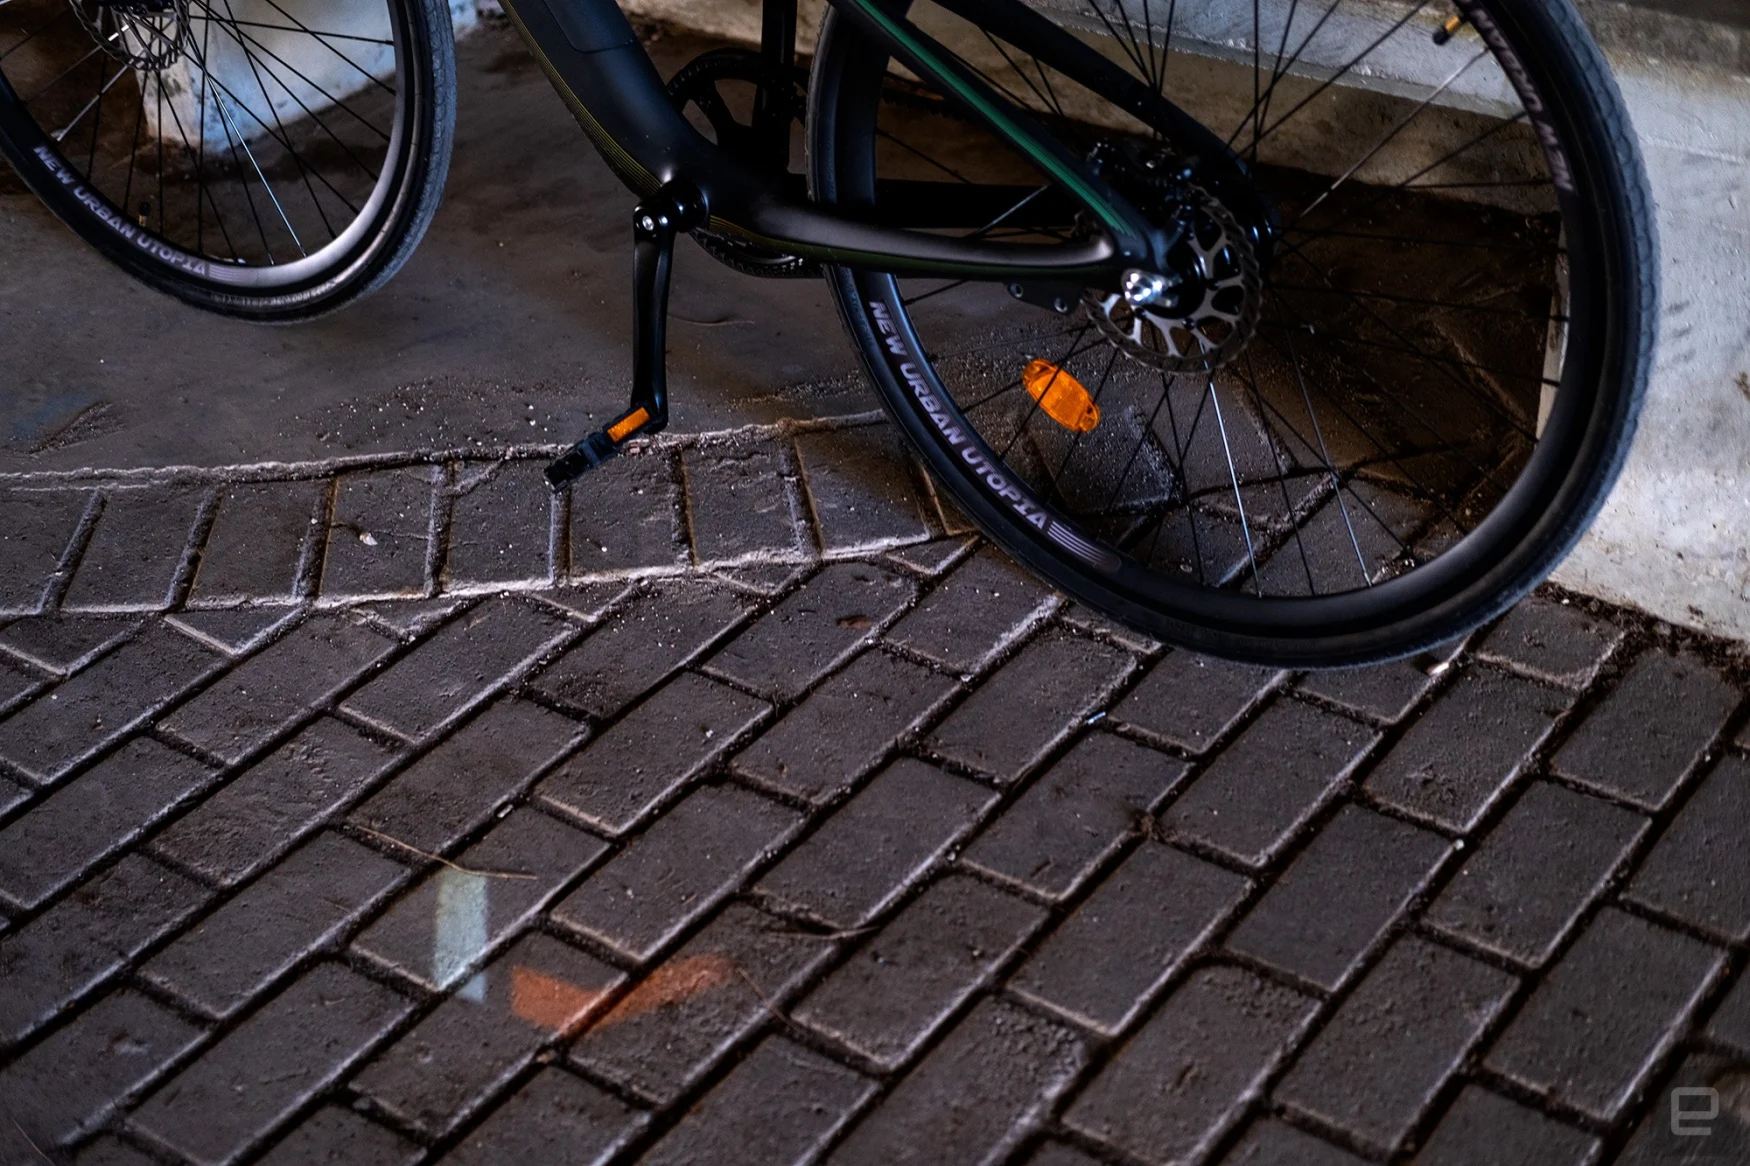 Urtopia e-bike projects turn signals onto the ground.